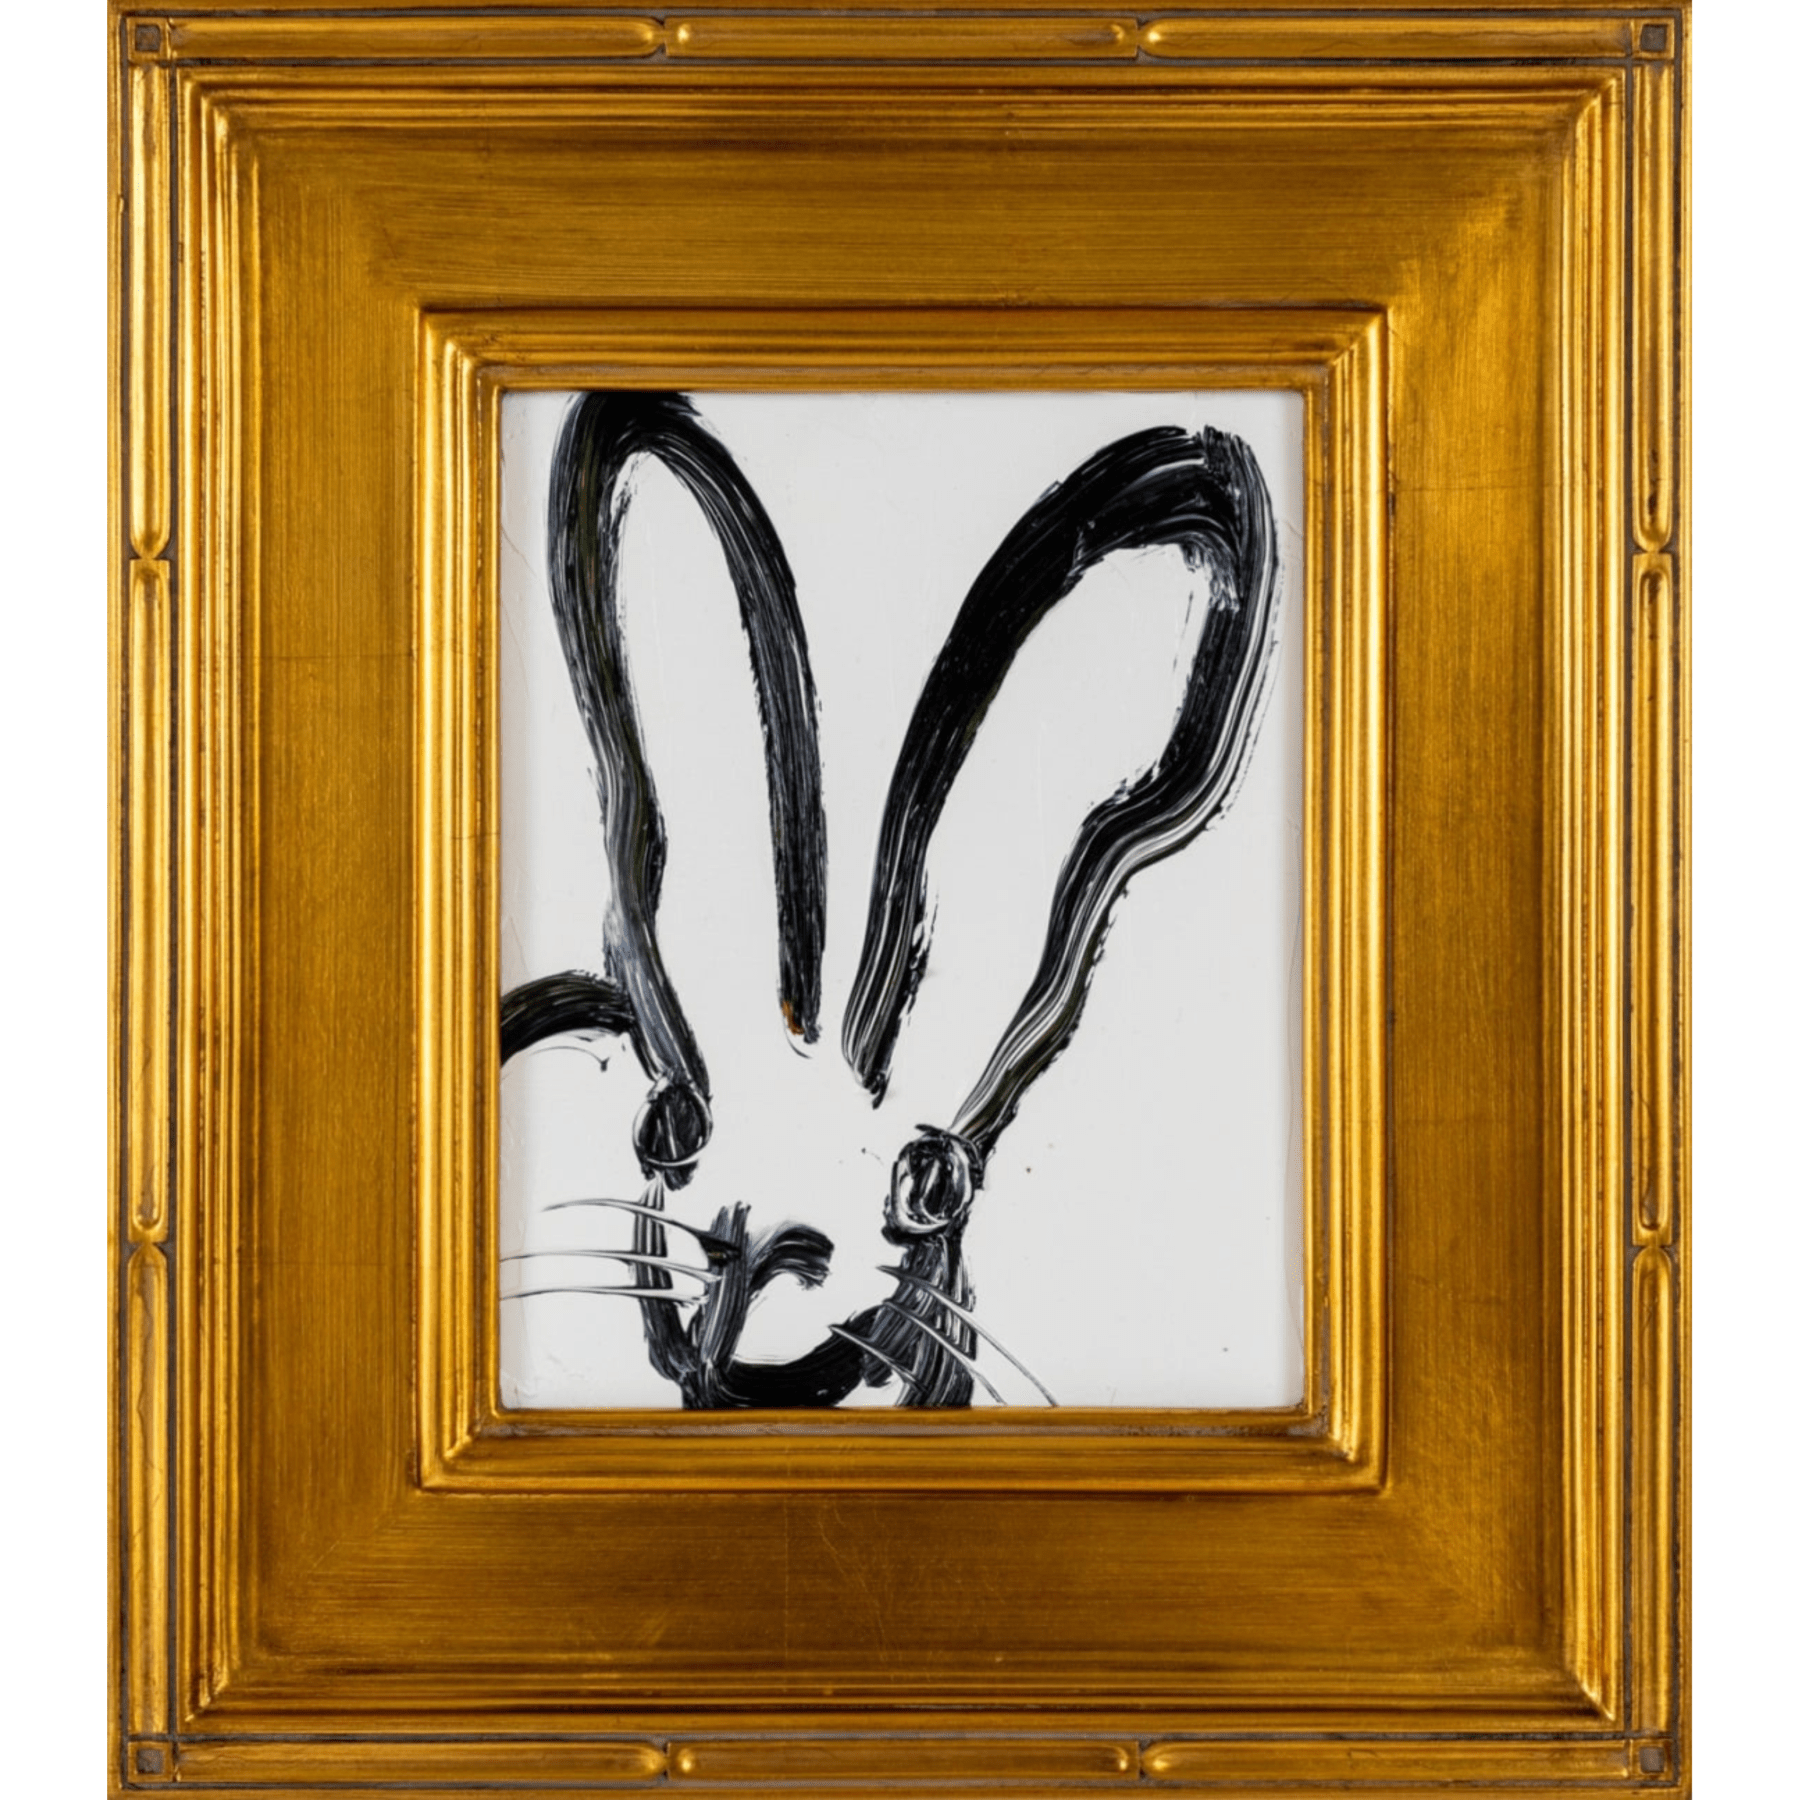 Bunnies & Beyond - Exhibitions - Manolis Projects Art Gallery